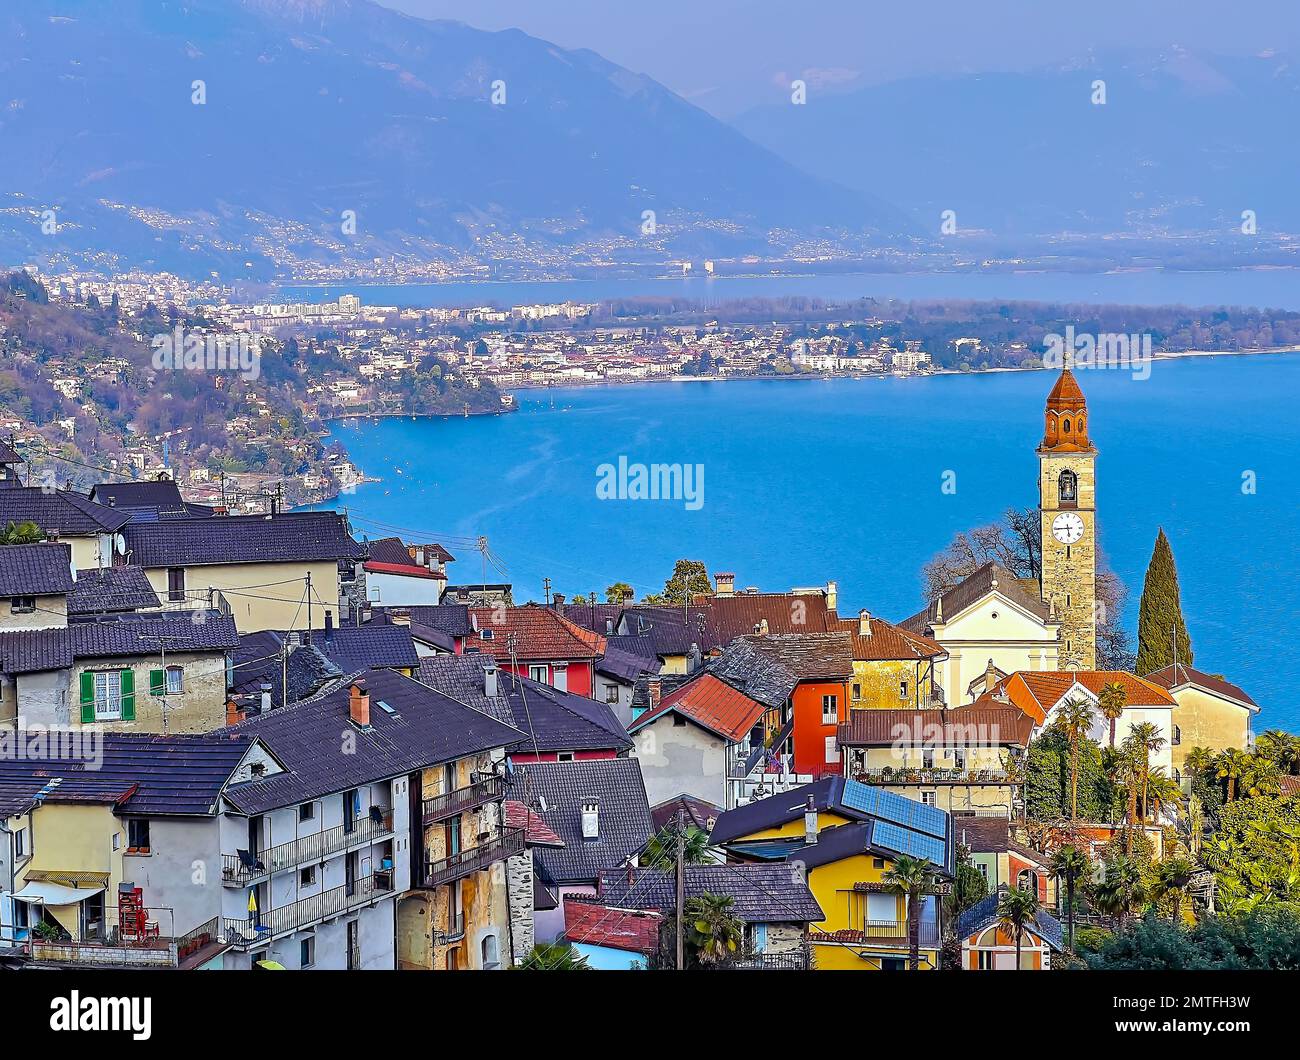 Slender bell tower of San Martino Church and vintage houses of Ronco sopra Ascona against the hazy Lake Maggiore and Alpine slopes, Switzerland Stock Photo